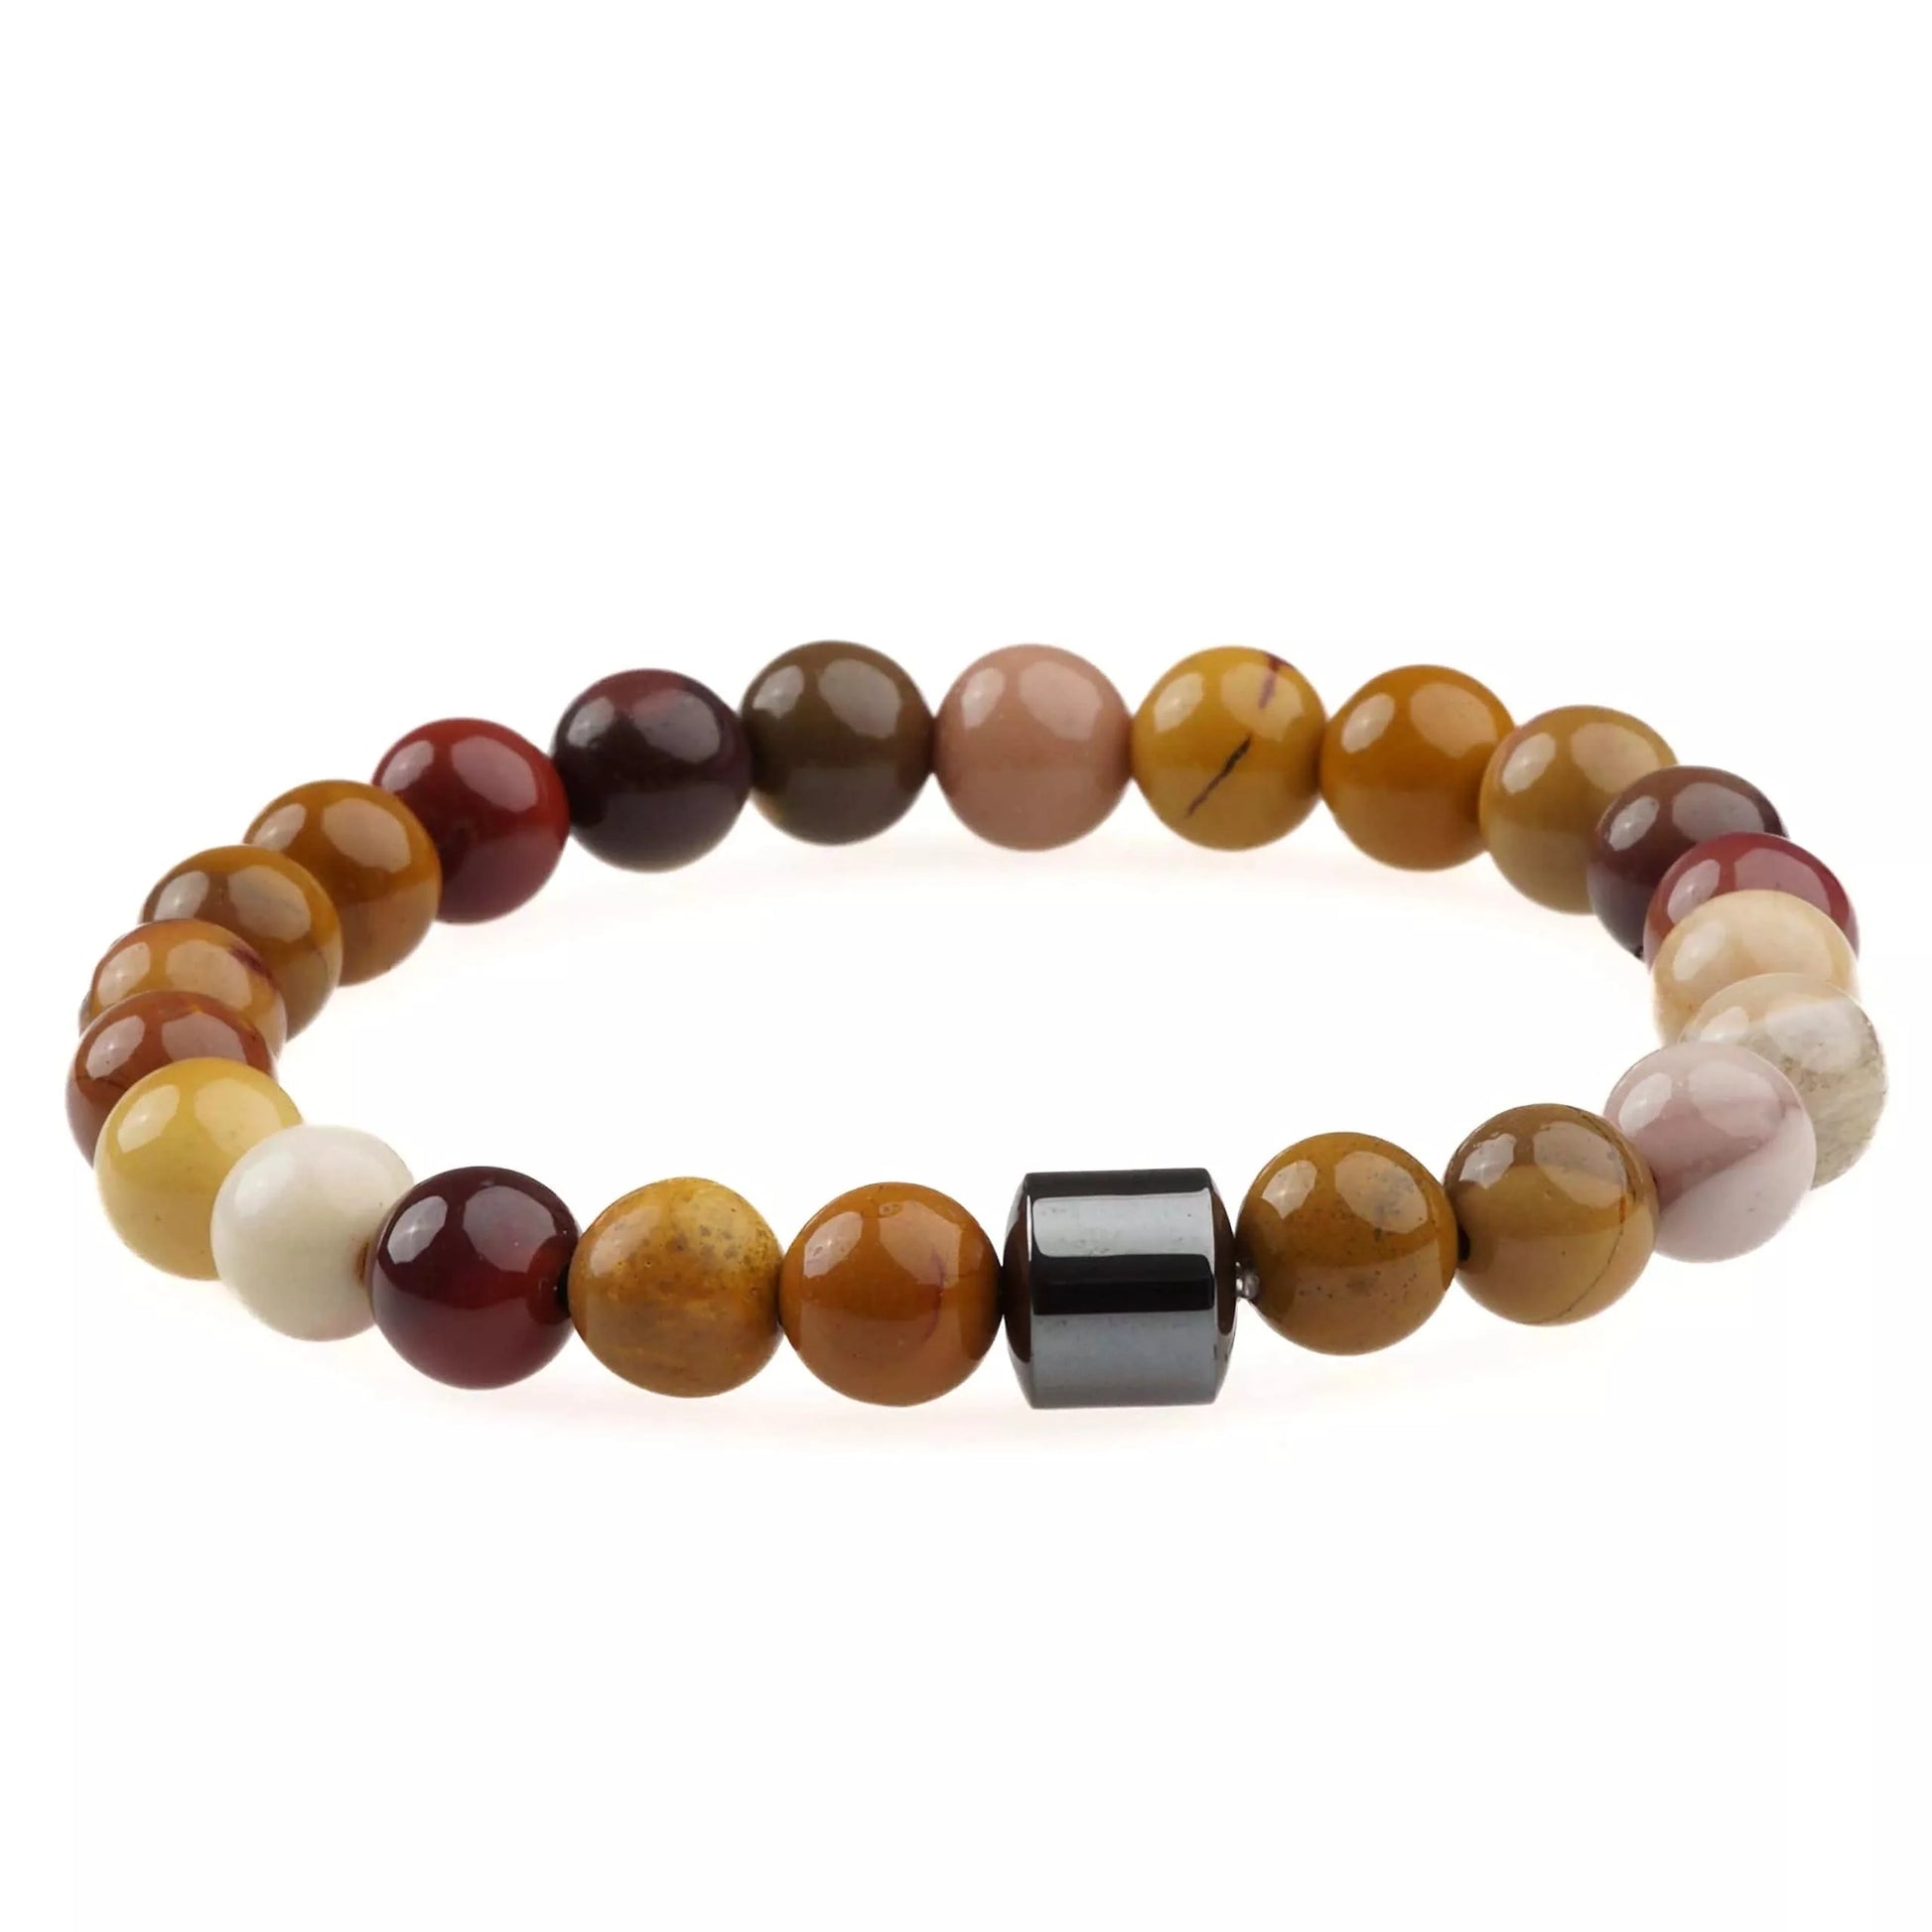 THE MEN THING Natural Beads Bracelet for Men - Become Money Magnet - Natural Volcanic Stone Colorful 7 Chakra Energy Stretch Bracelet (7inch)